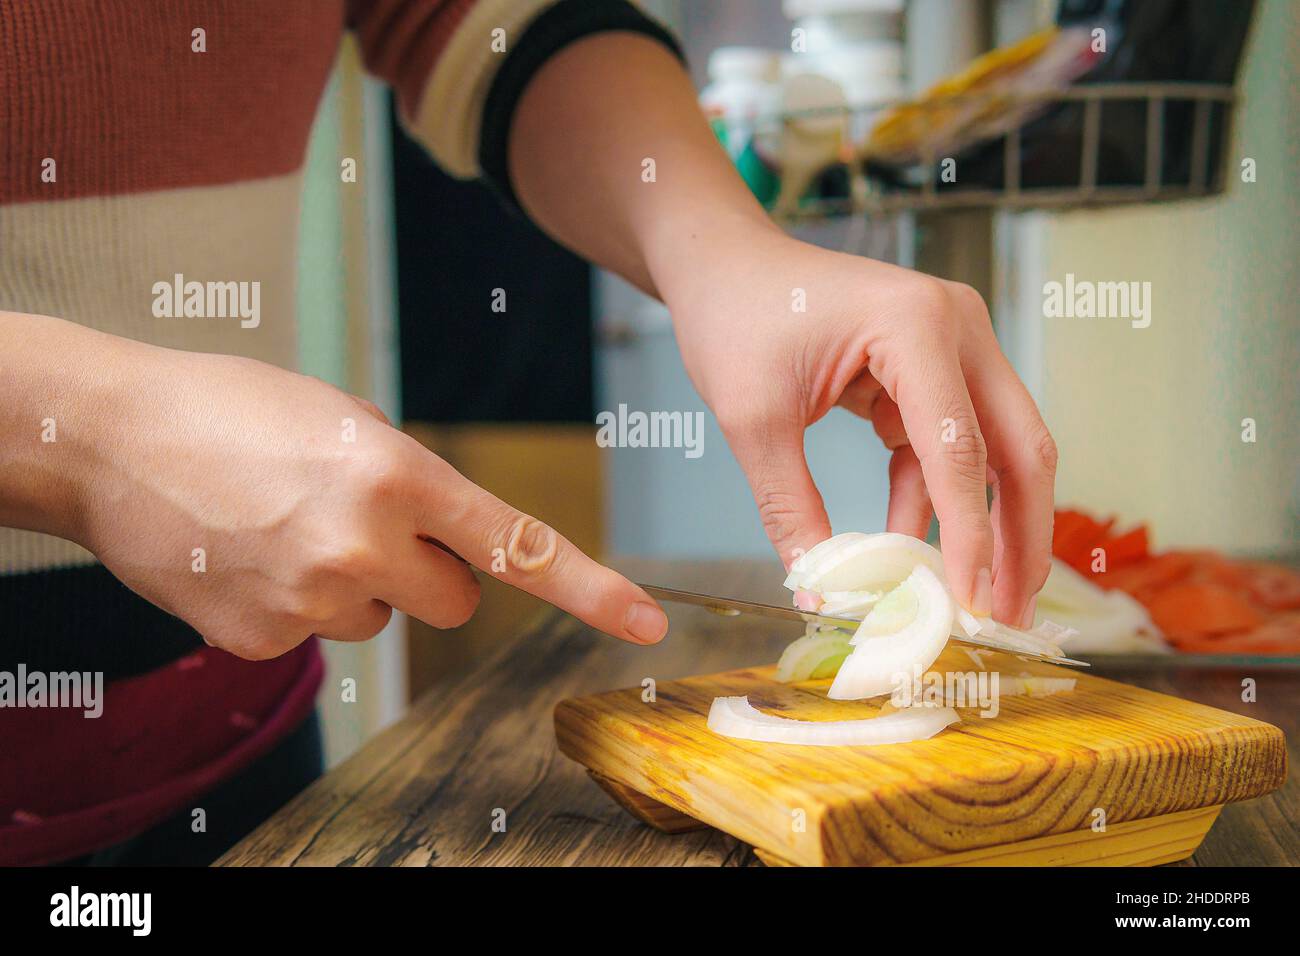 On the table you can see some hands cutting with a chef's knife a white onion, slices of onion Stock Photo